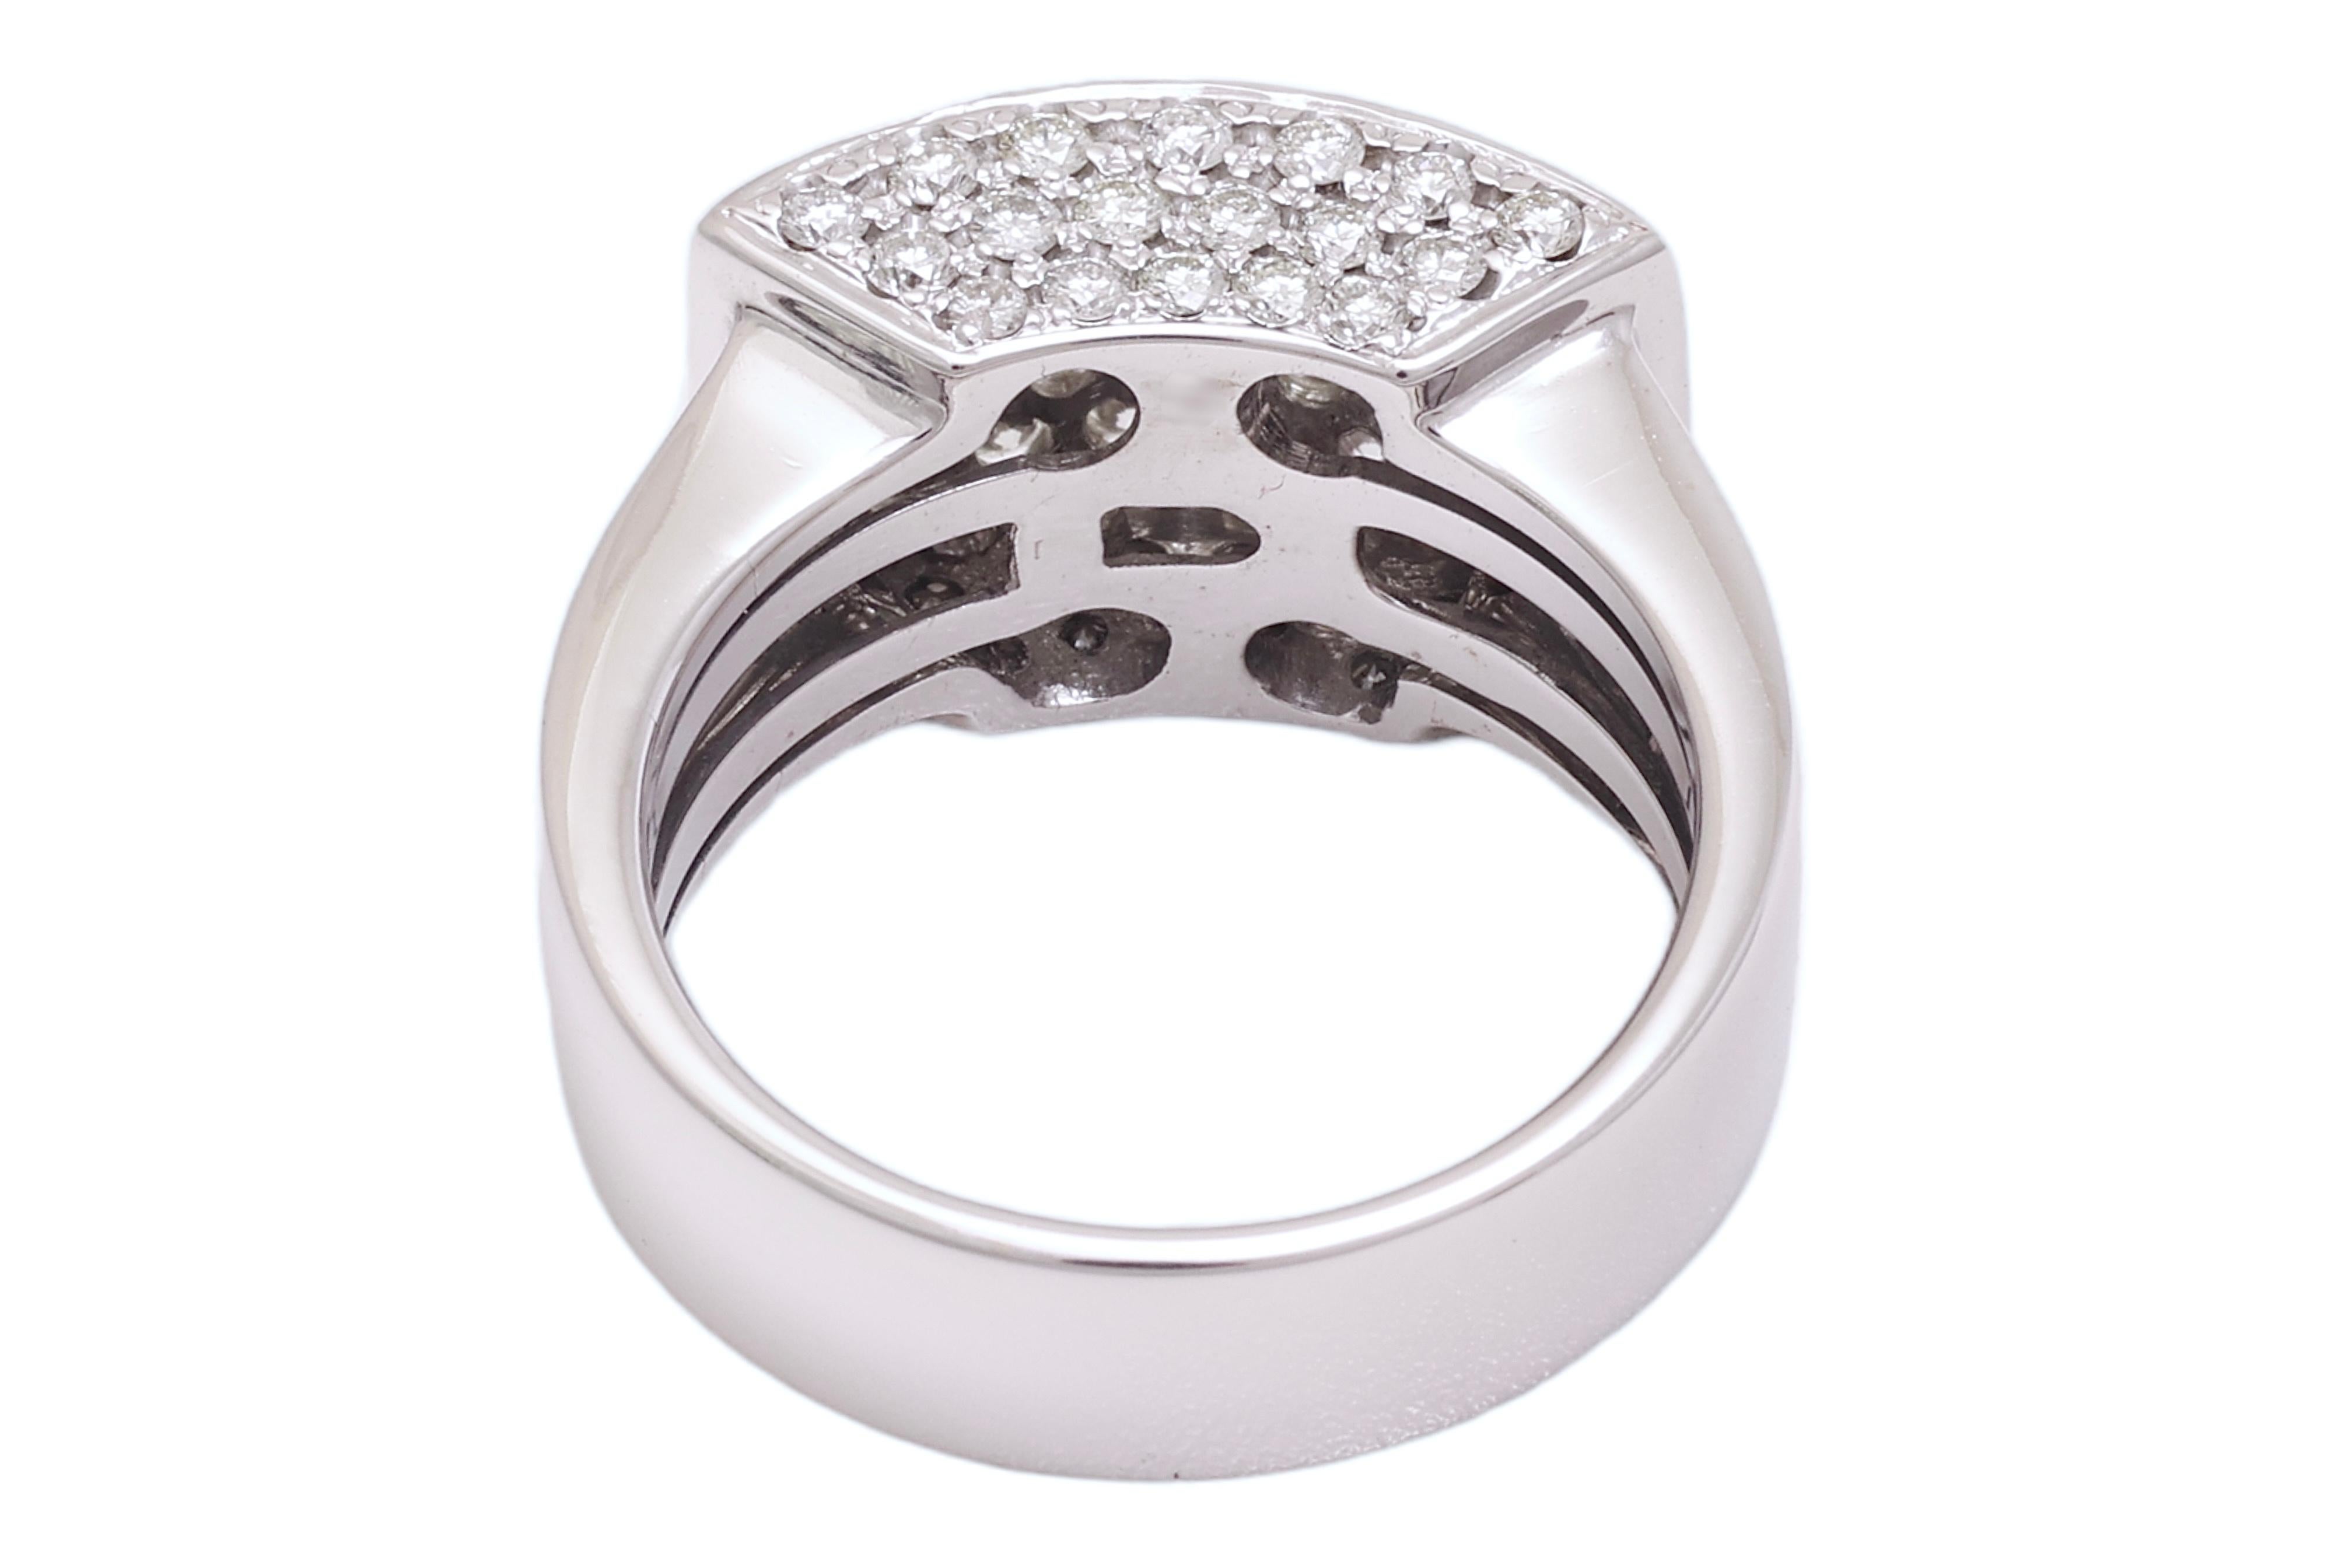 Women's or Men's 18 kt. White Gold Engagement Ring Set With 2.88 ct. Brilliant Cut Diamonds For Sale